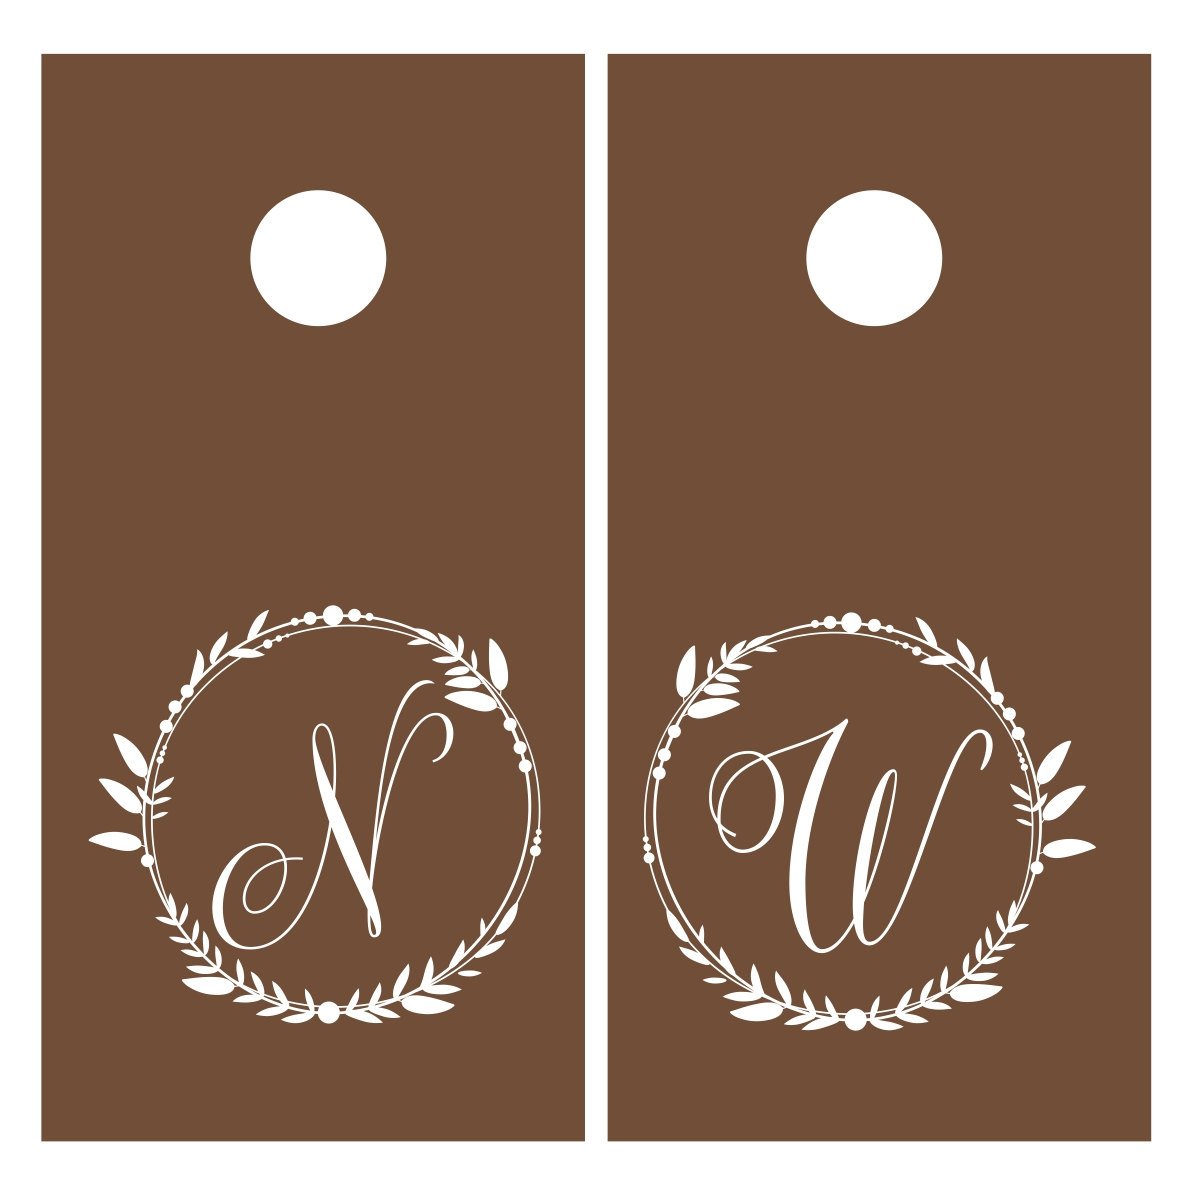 Rustic Style Personalized Wedding Wreath Vinyl Decal Set for Cornhole Game Boards